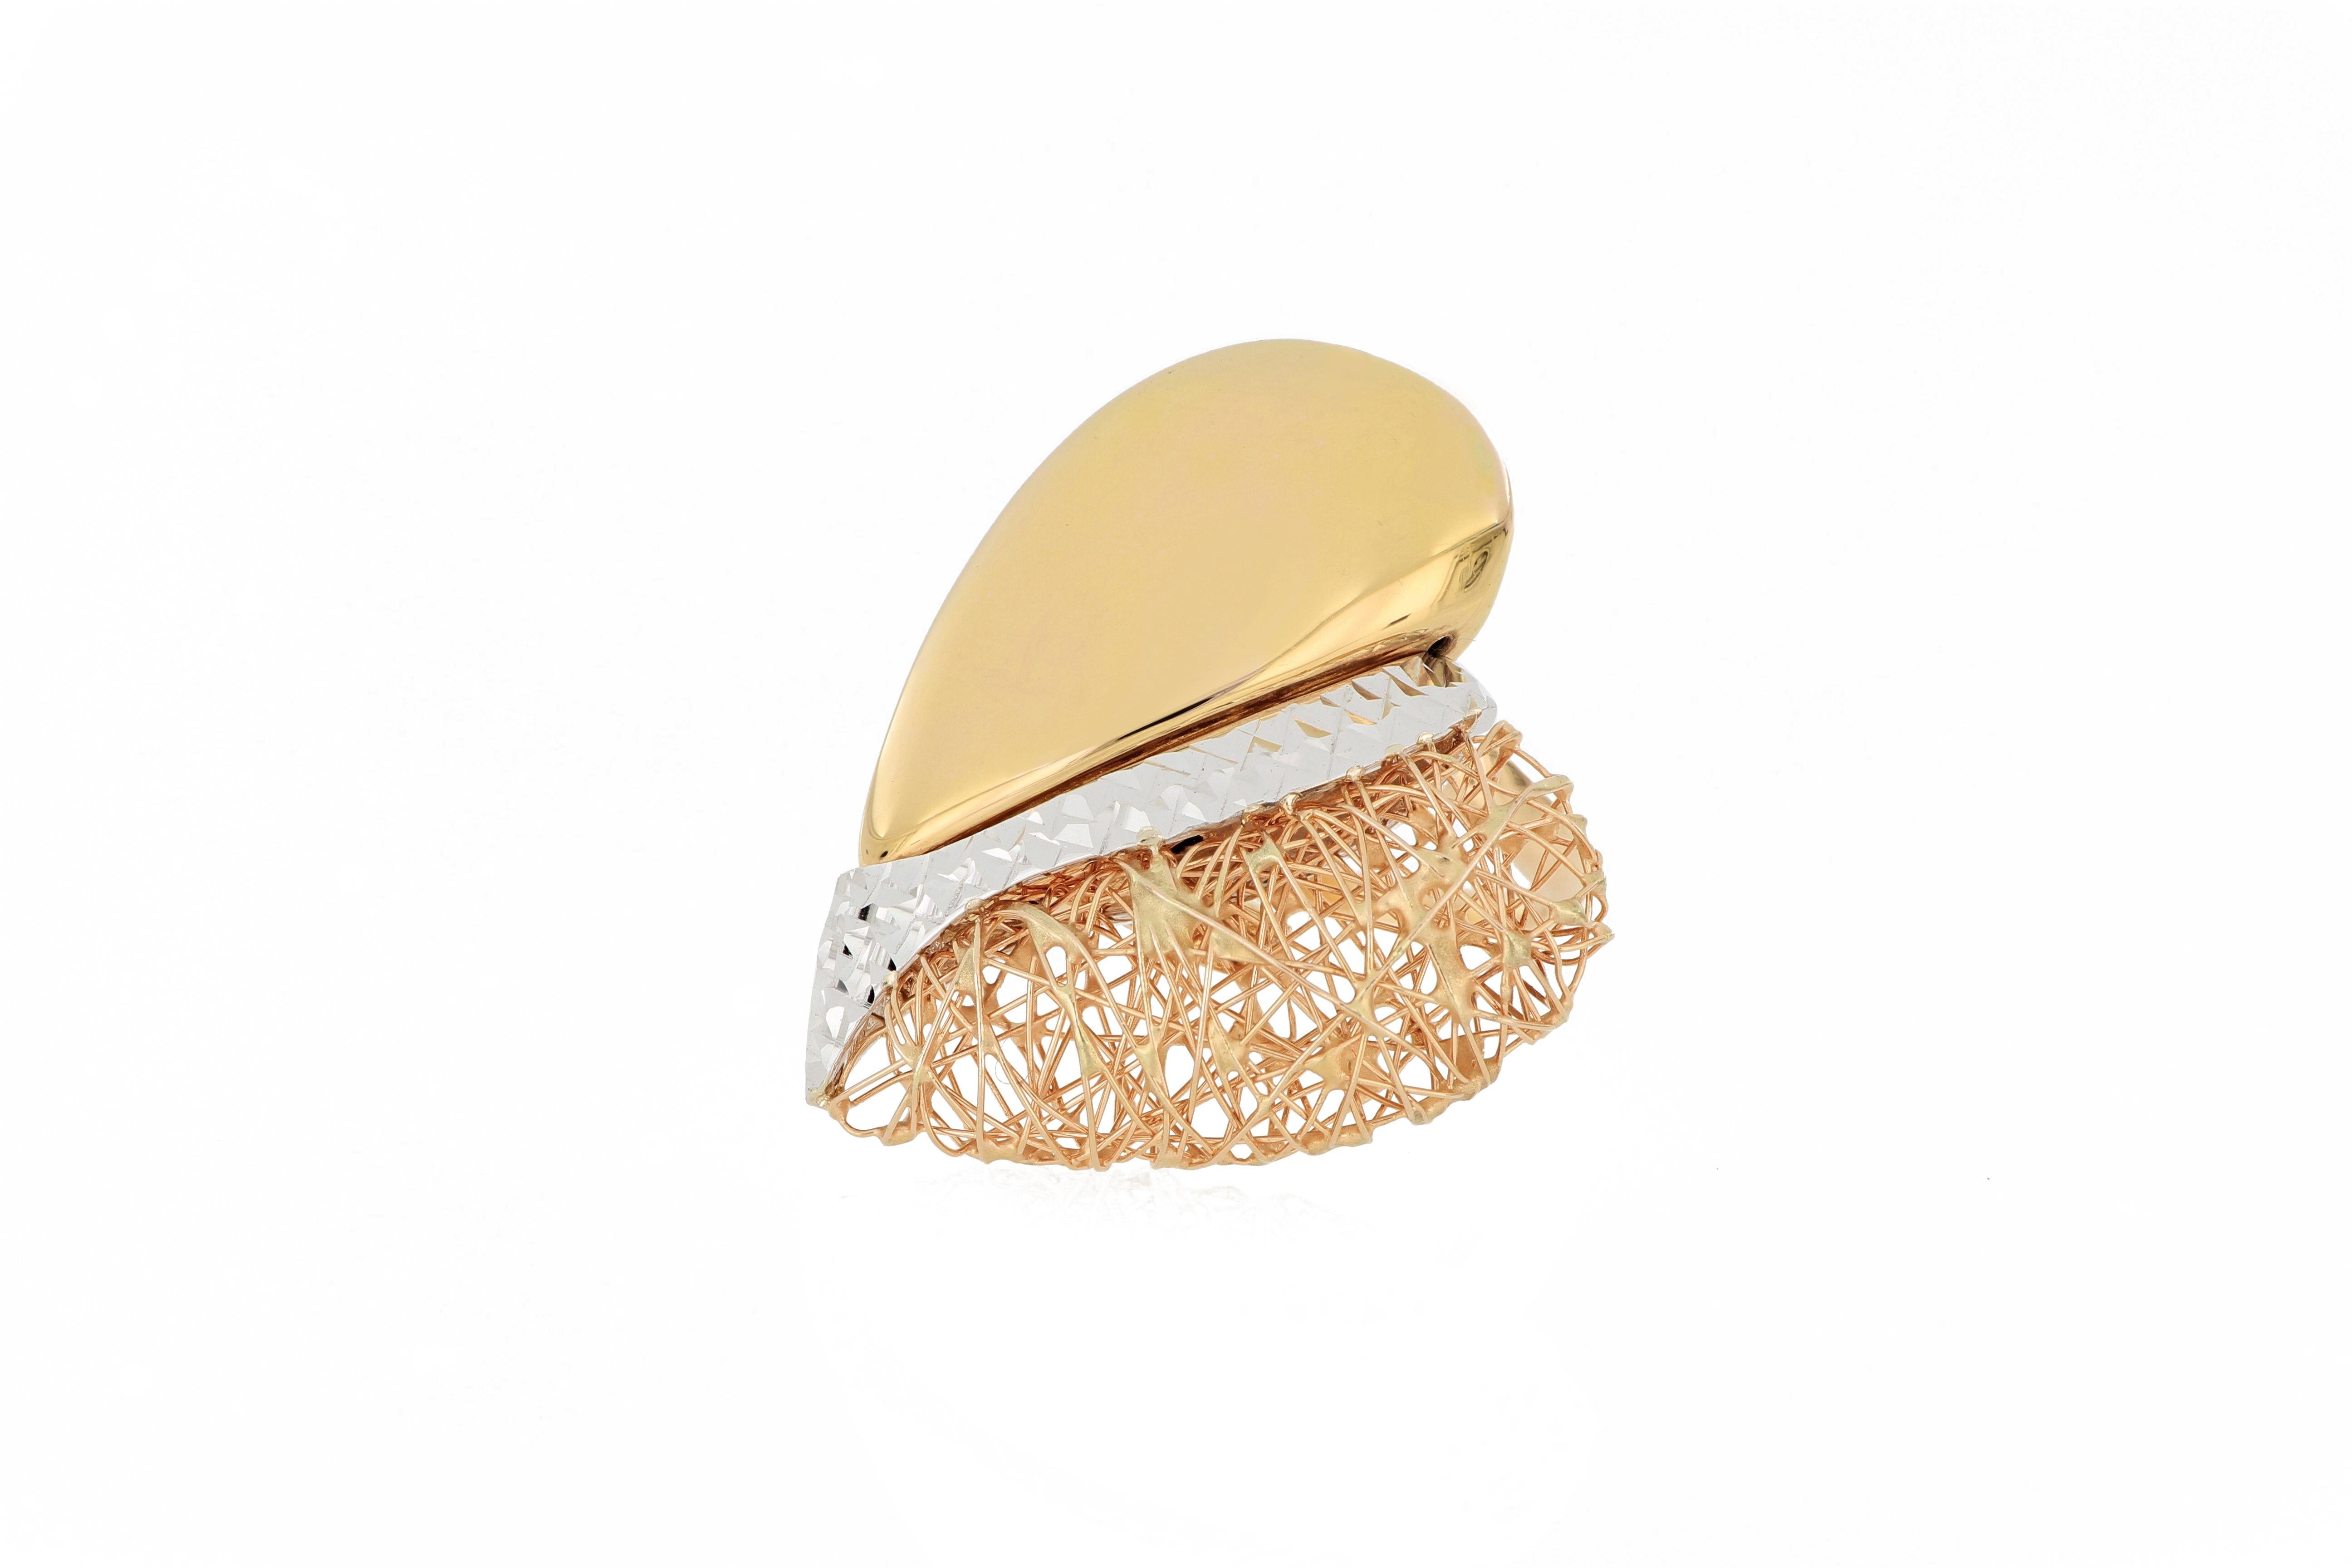 A stylish 18 karat gold heart shape tricolour ring, Italian made, composed of white gold, yellow gold and rose gold in different texture surface.
O’Che 1867 was founded one and a half centuries ago in Macau. The brand is renowned for its high